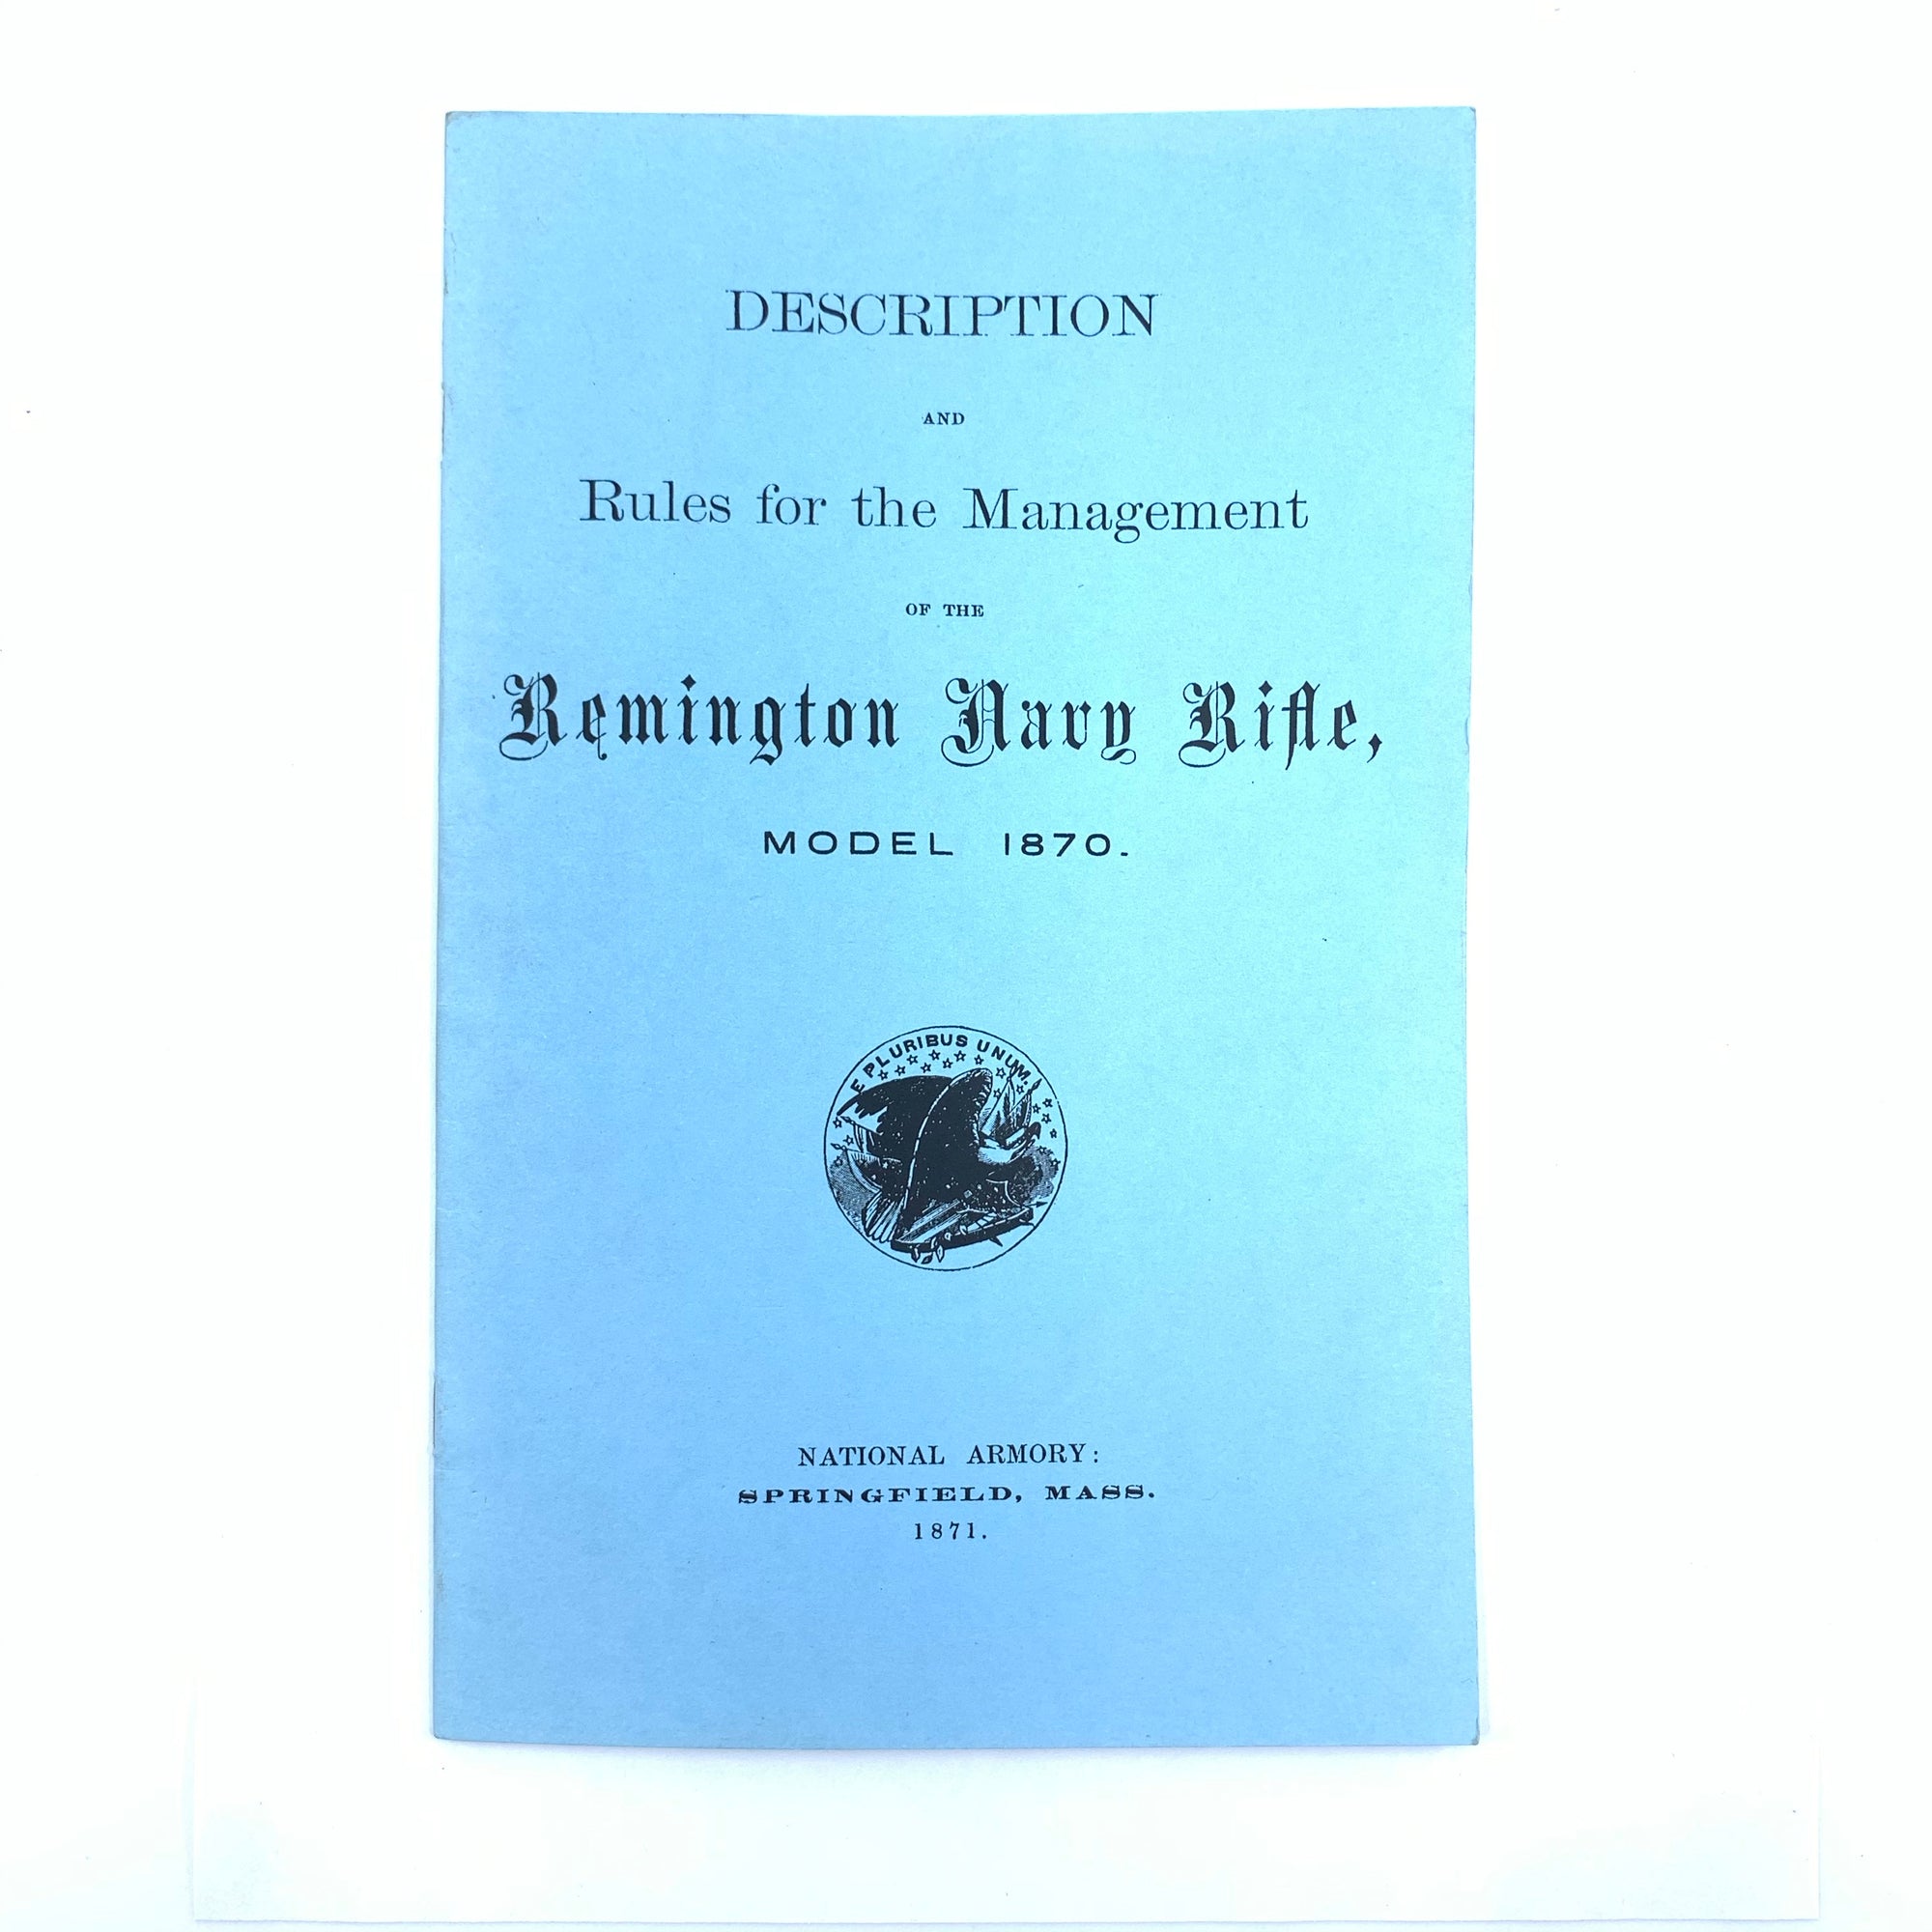 Description and Rules of the Remington Navy Rifle Model 1870 13 pgs Reprint